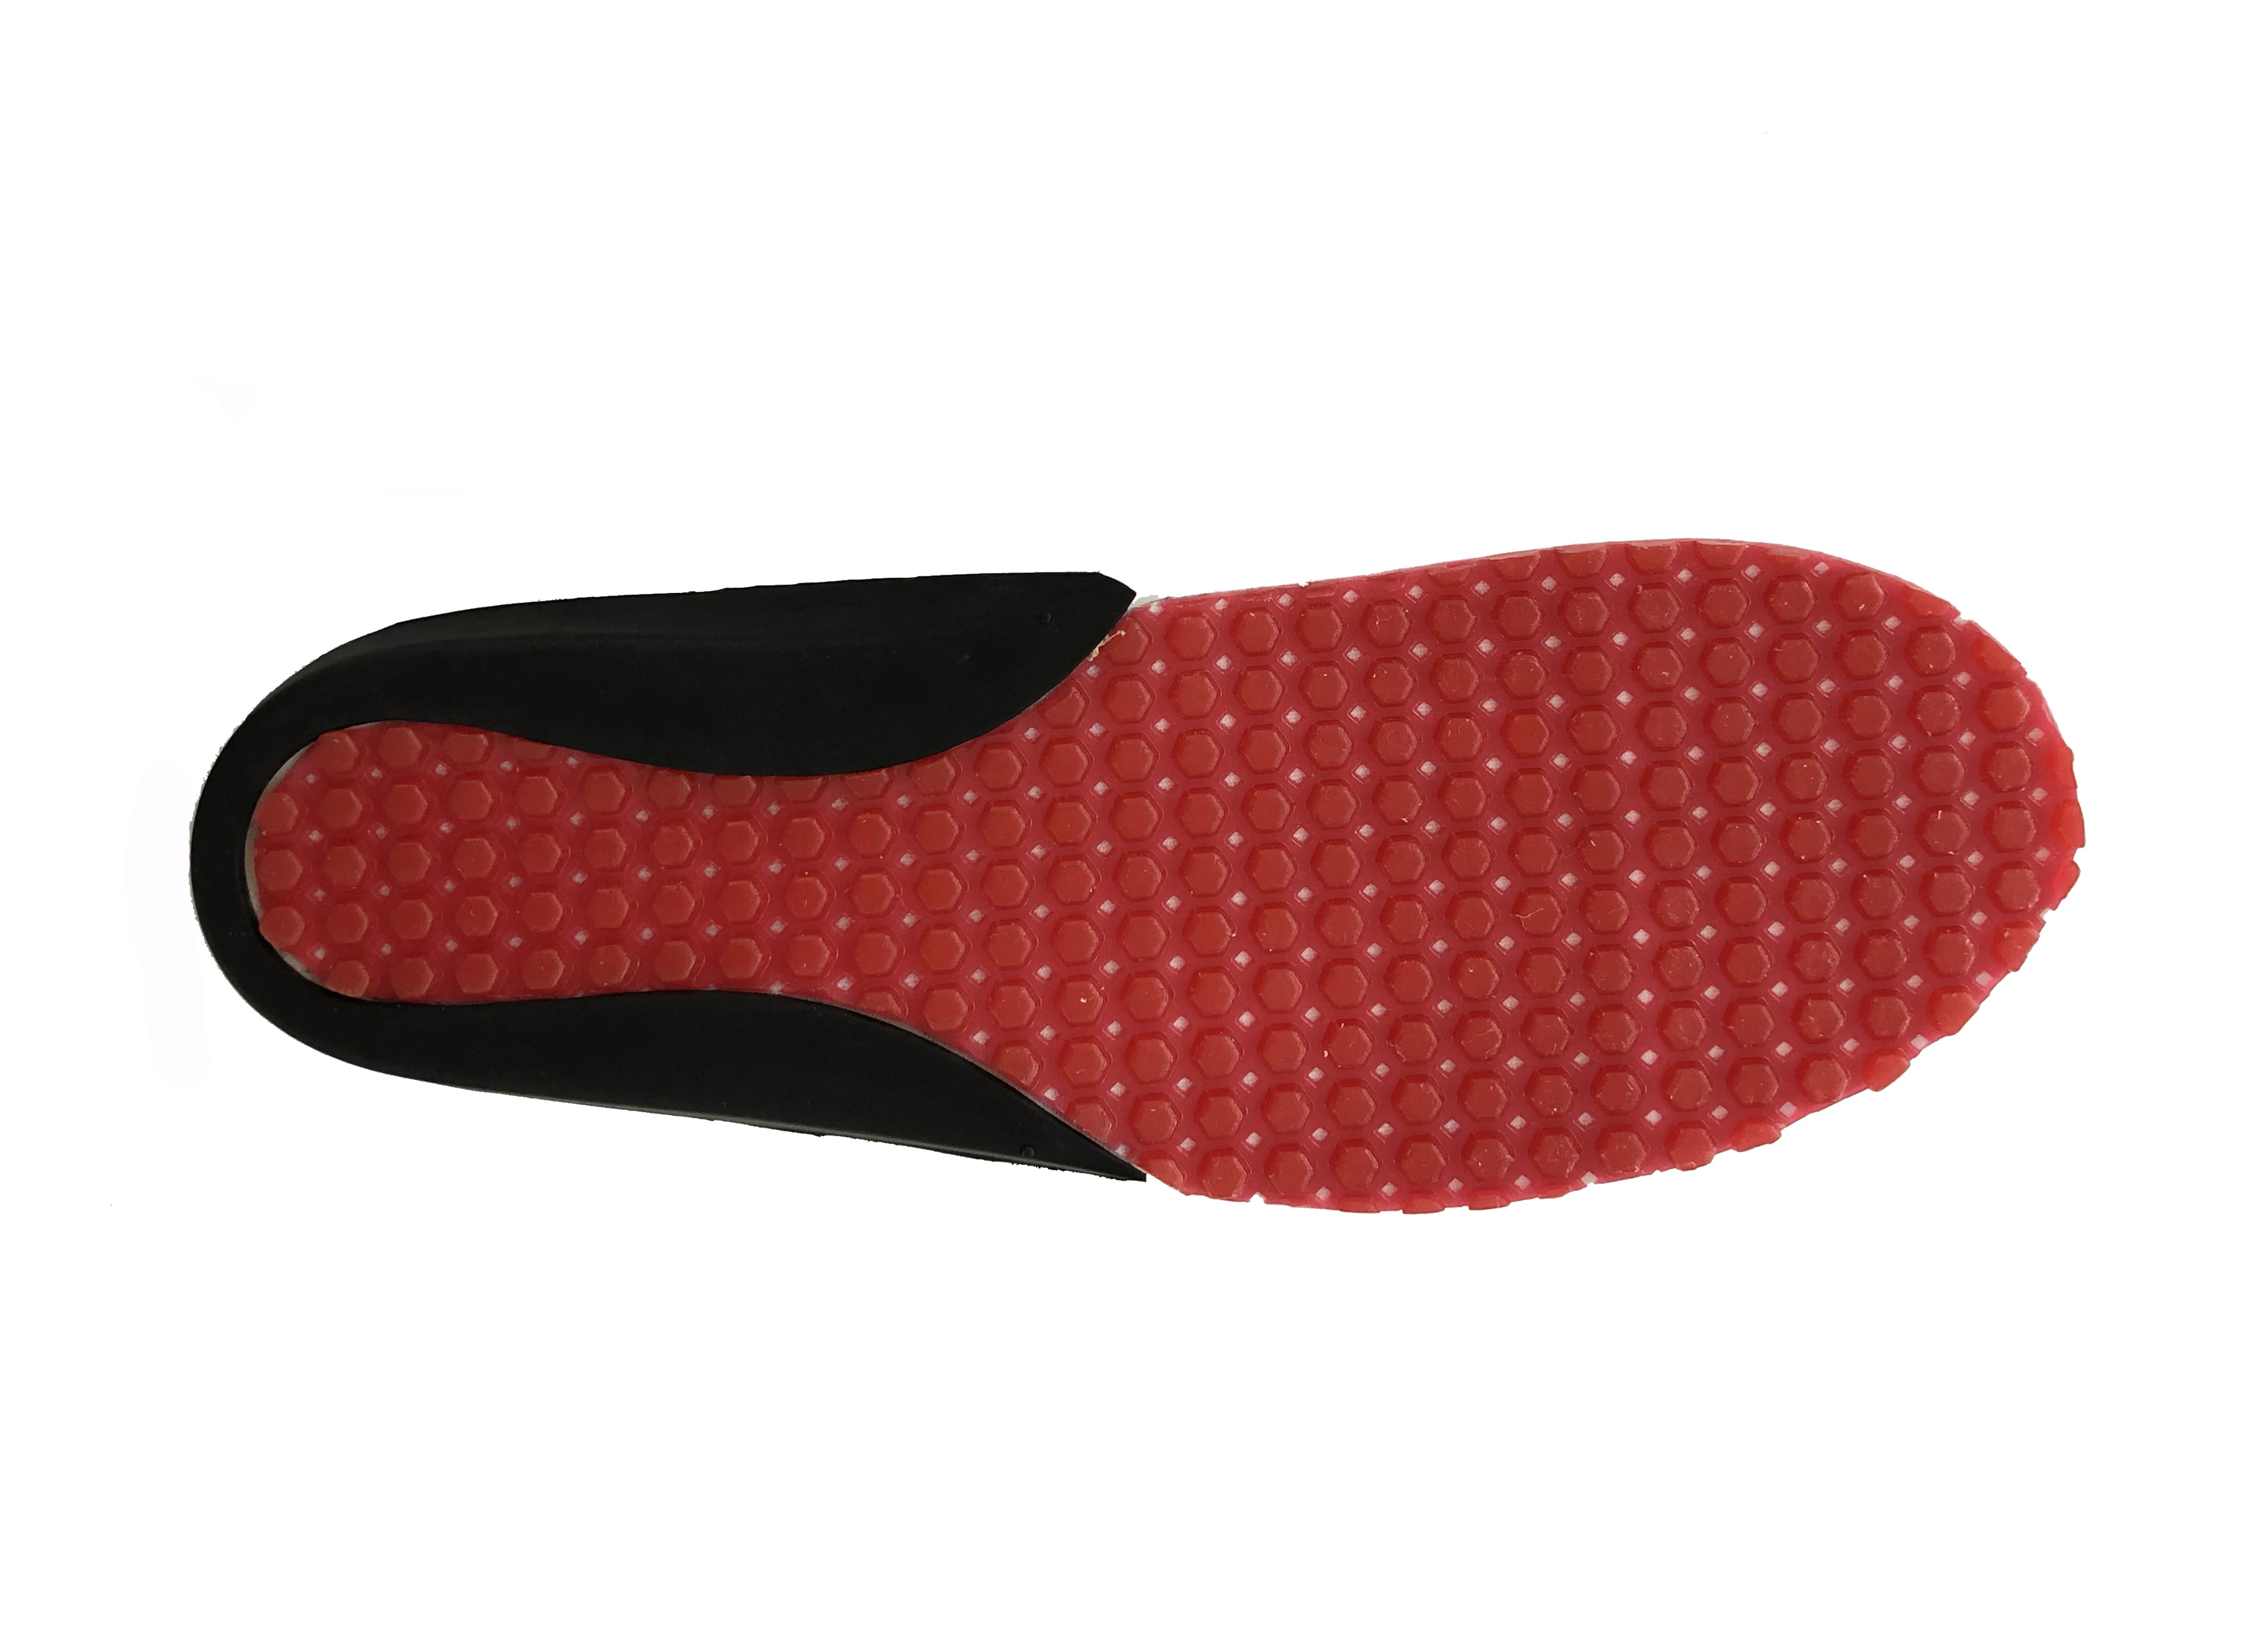 Lx-0639 Ventilated Washable Massage Shoe Insole With Pu Leather - Buy ...